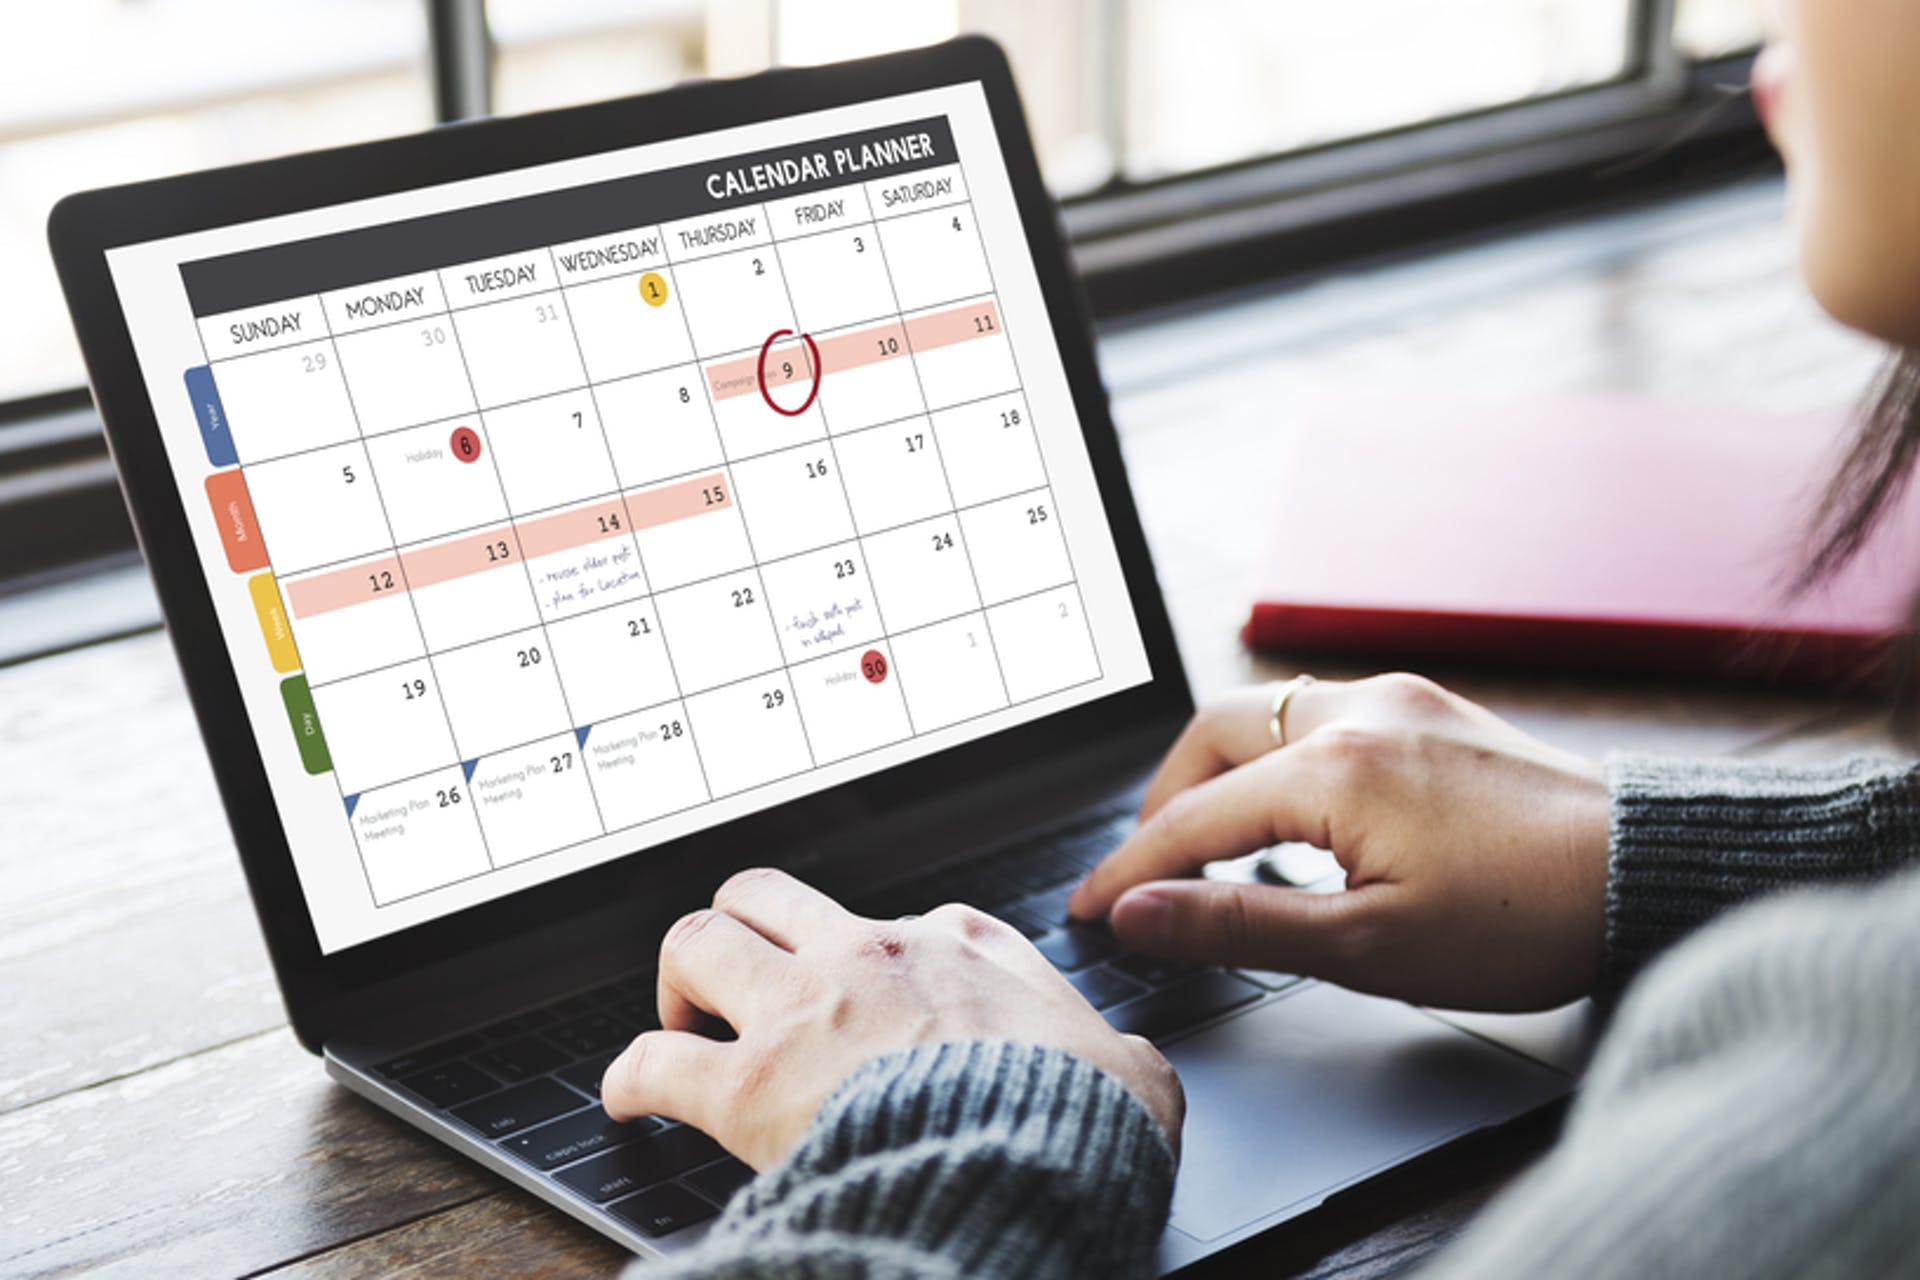 Appointment Scheduling Software 